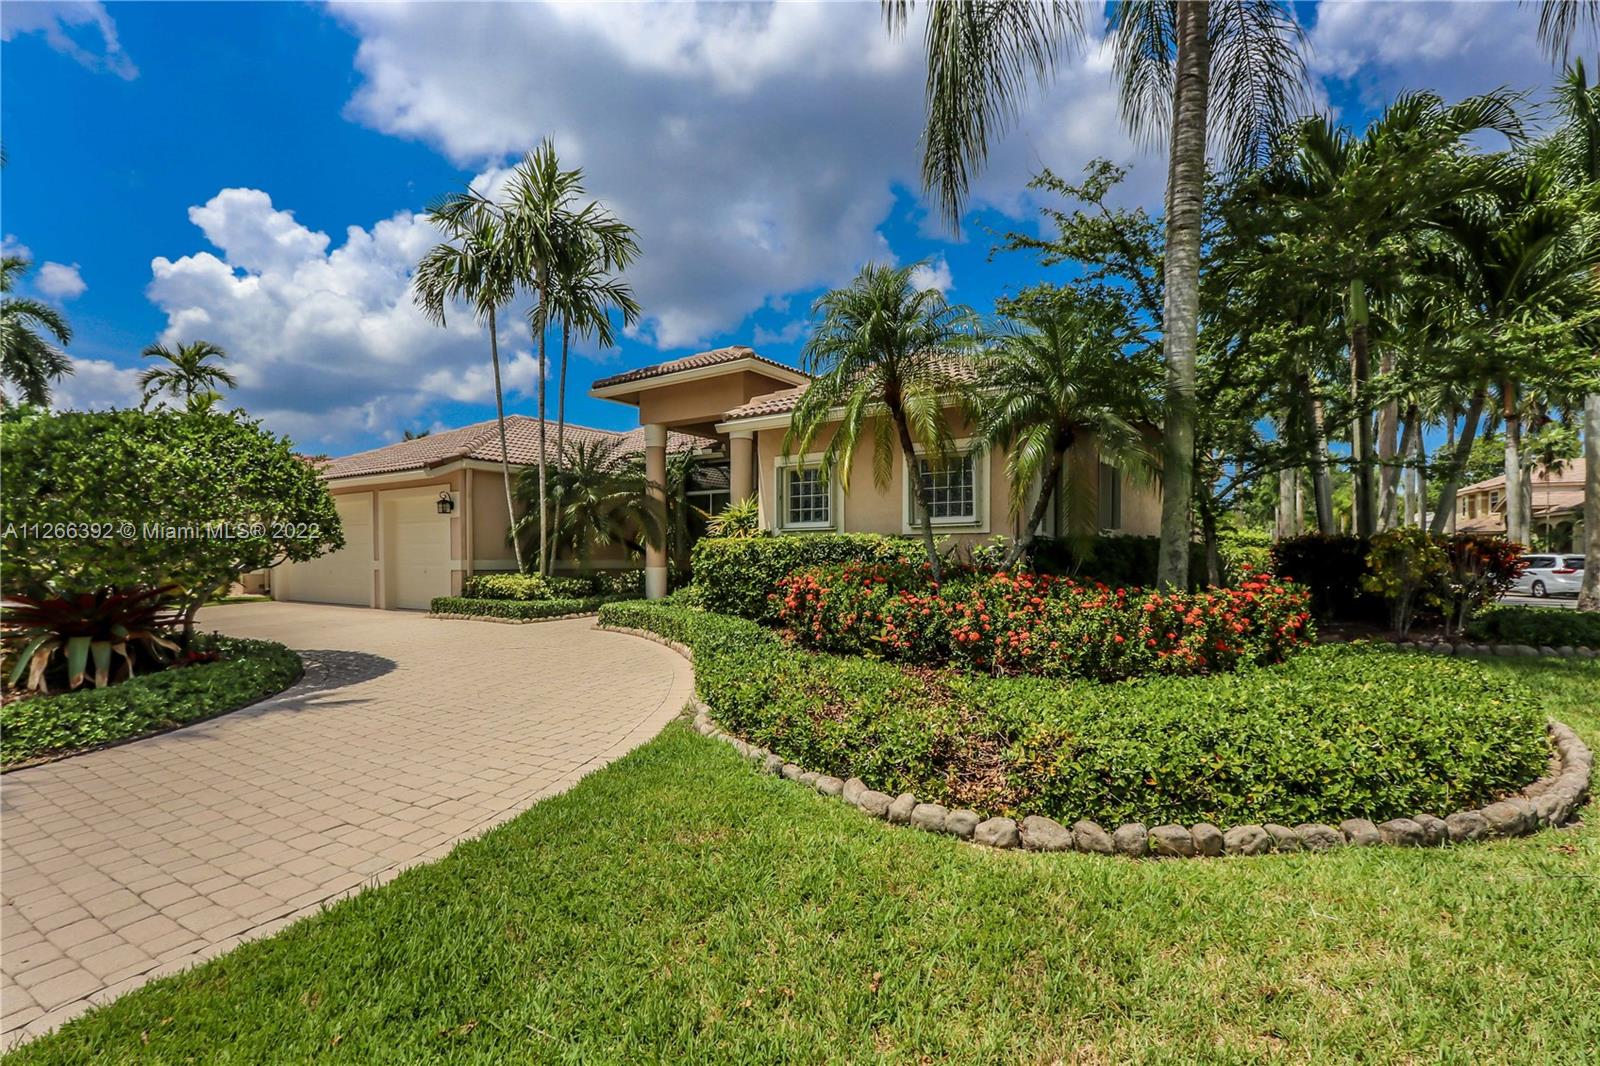 Welcome to your dream house in the beautiful Weston Hills Country Club. This is a one story, 4 bedrooms, 3.5 bath, plus den with window and closet ideal for a home office. Spacious 3-car garage and circular driveway. Upon entering, gorgeous pool views set the tone for an inviting and classic South Florida living area. The home is walking distance to plenty of open space and a beautifully maintained neighborhood park - perfect for social, wellness, and recreation activities. The home is meticulously maintained with high-end custom design touches, including high ceilings, custom closets, luxurious finishes, and more. The property is excellently located near top-rated A-rated schools, shopping, restaurants, major highways, a twenty minutes drive to Florida’s famous beaches, and more!